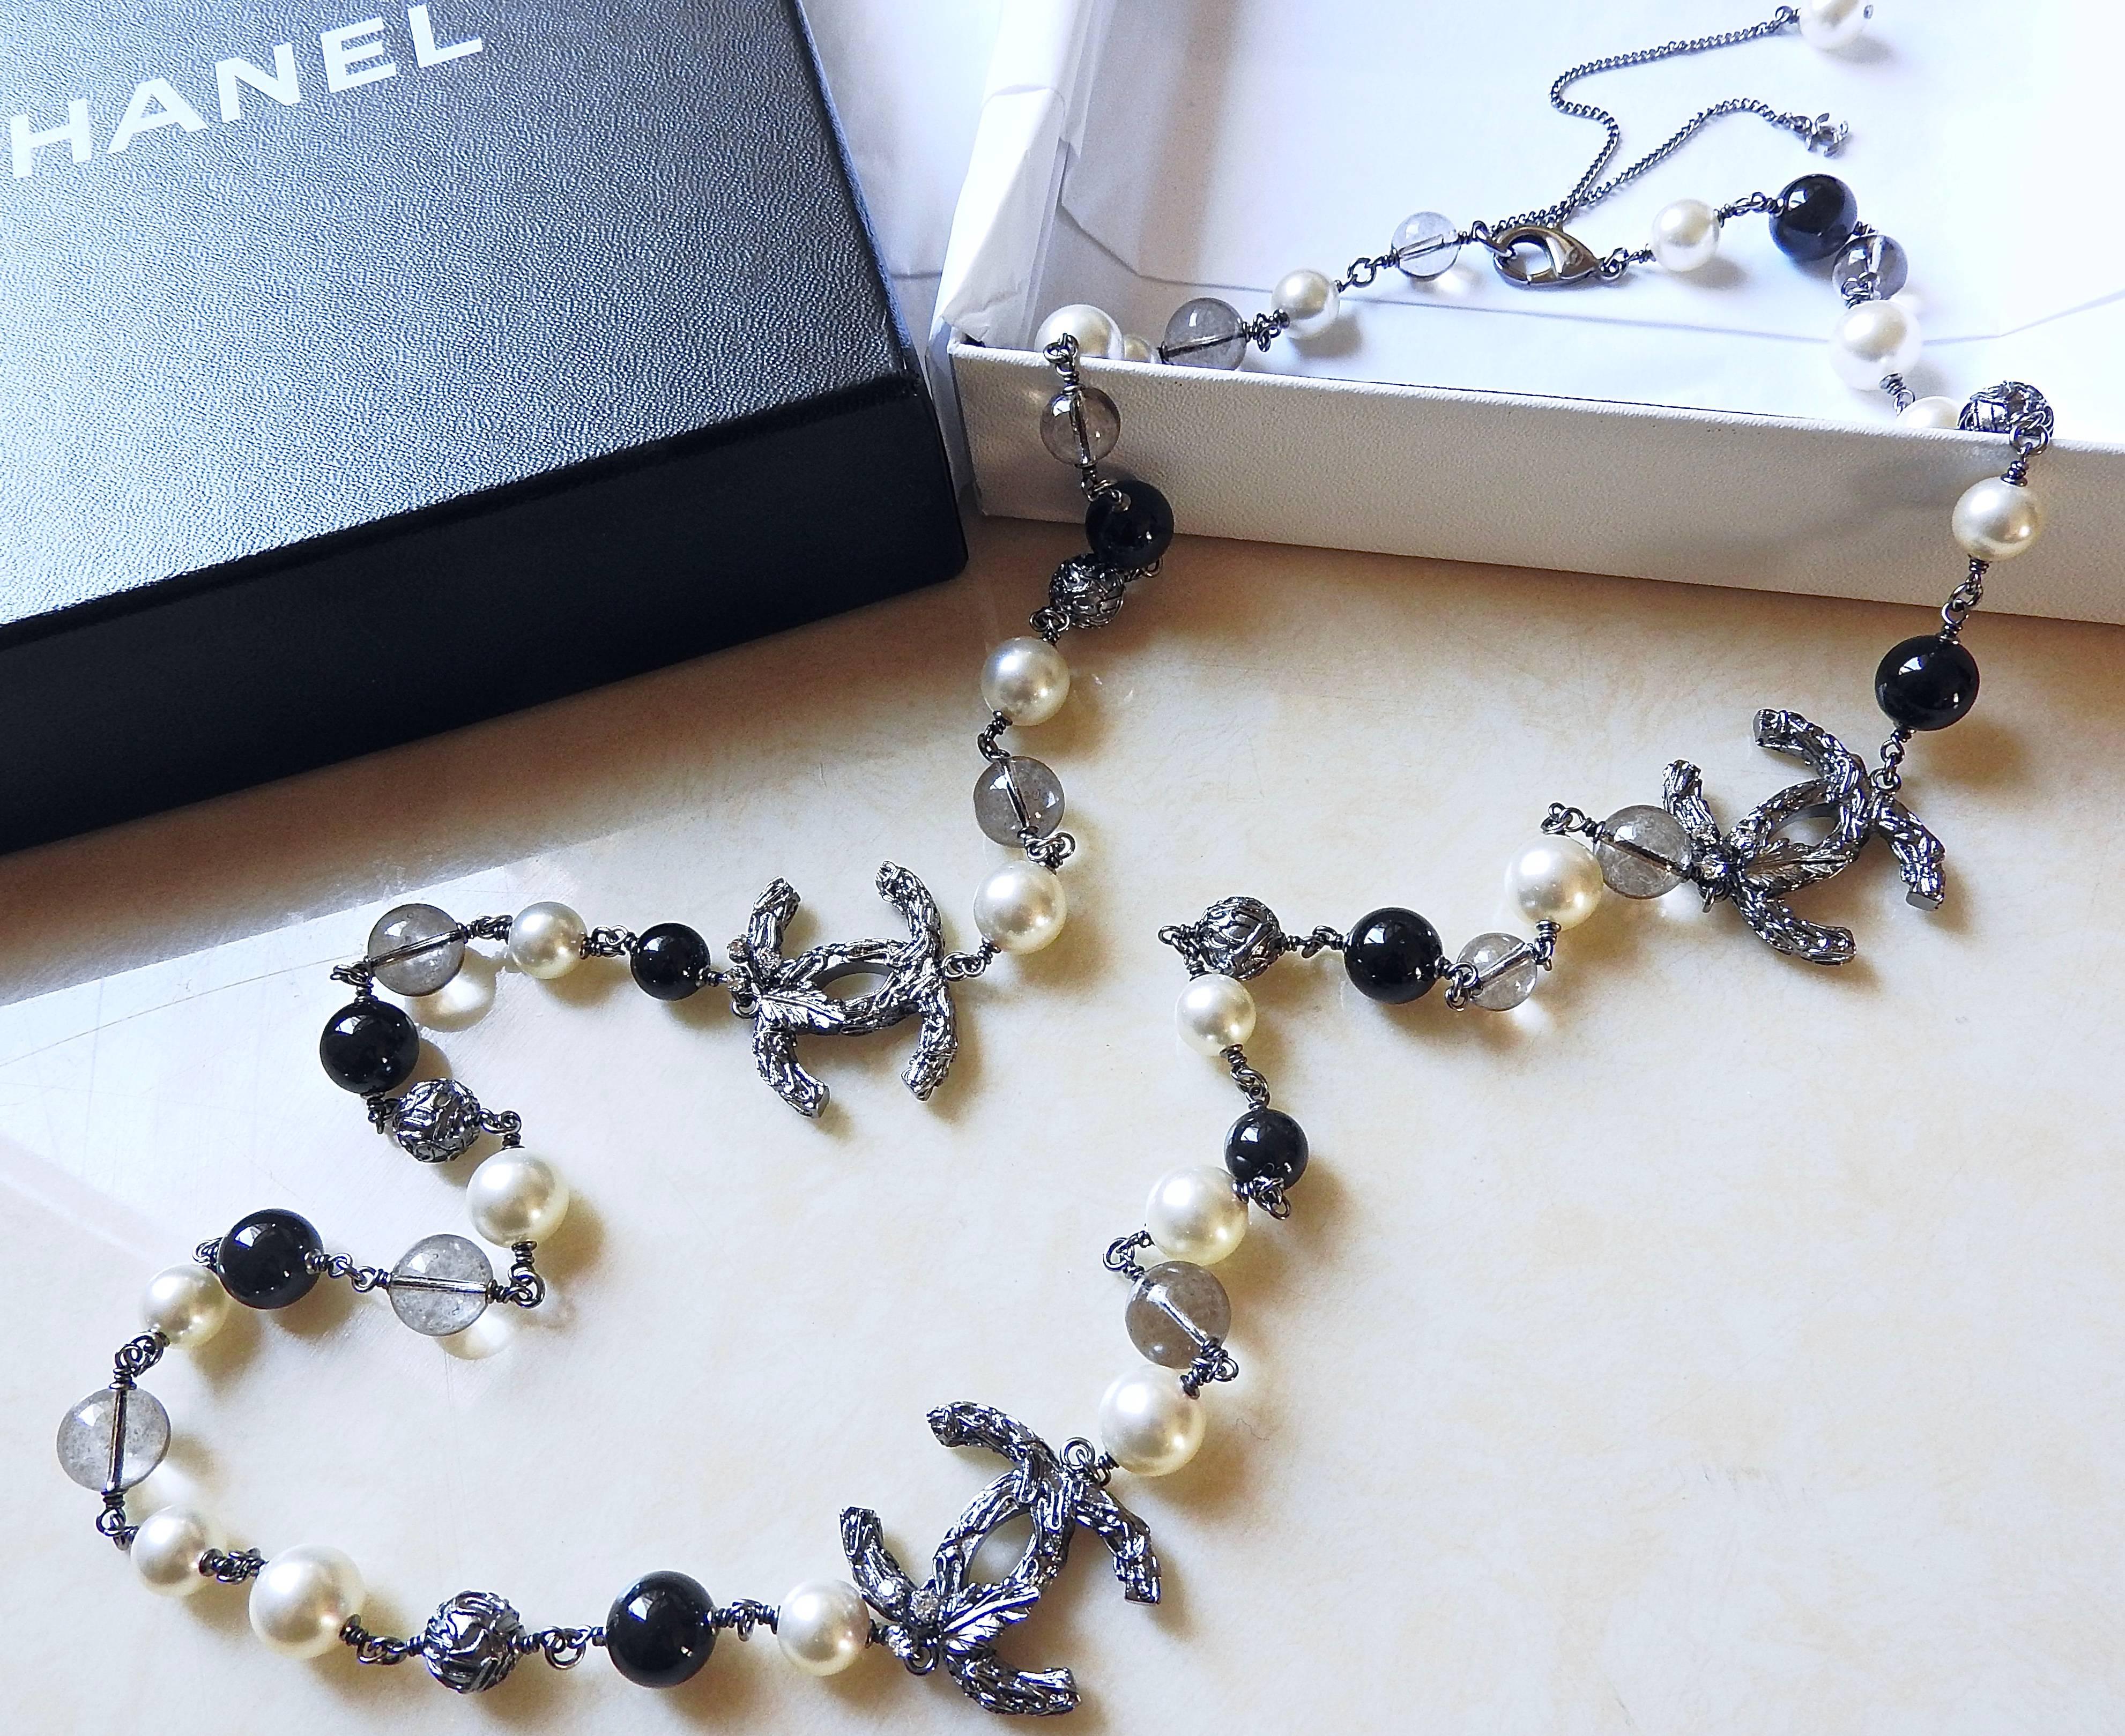  THIS 2013 Cruise Chanel long necklace is so beautiful with all highest qualities for  your important events. Constructed with solid gunmetal 3 D jeweled tree, glass bead, smoke quartz, gunmetal flower bead and highest quality of creamy white pearls